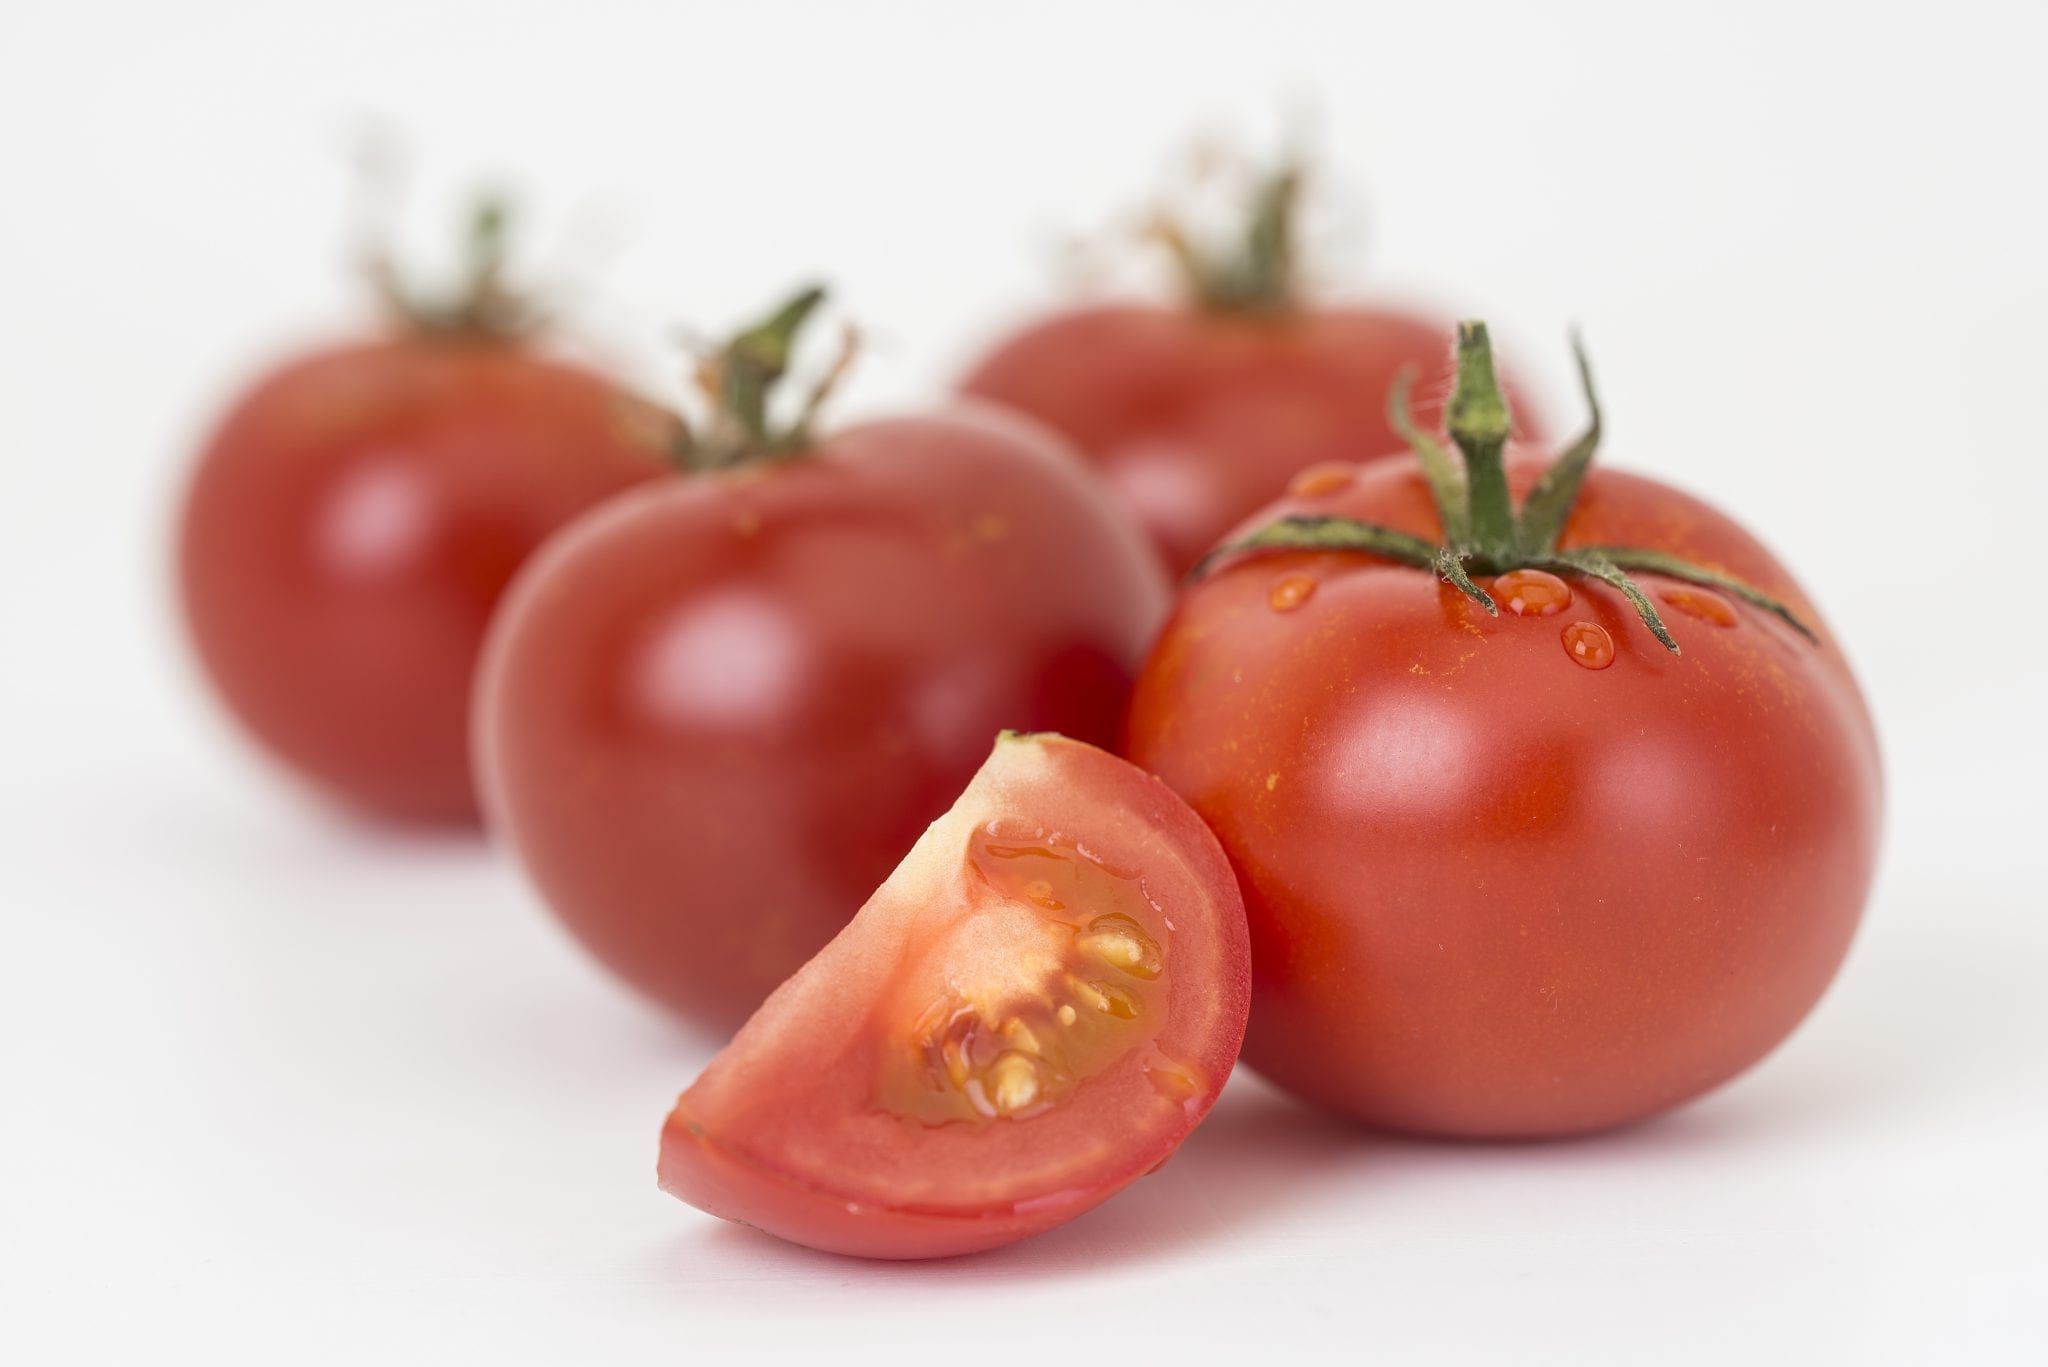 Scientists produce beneficial natural compounds in tomato